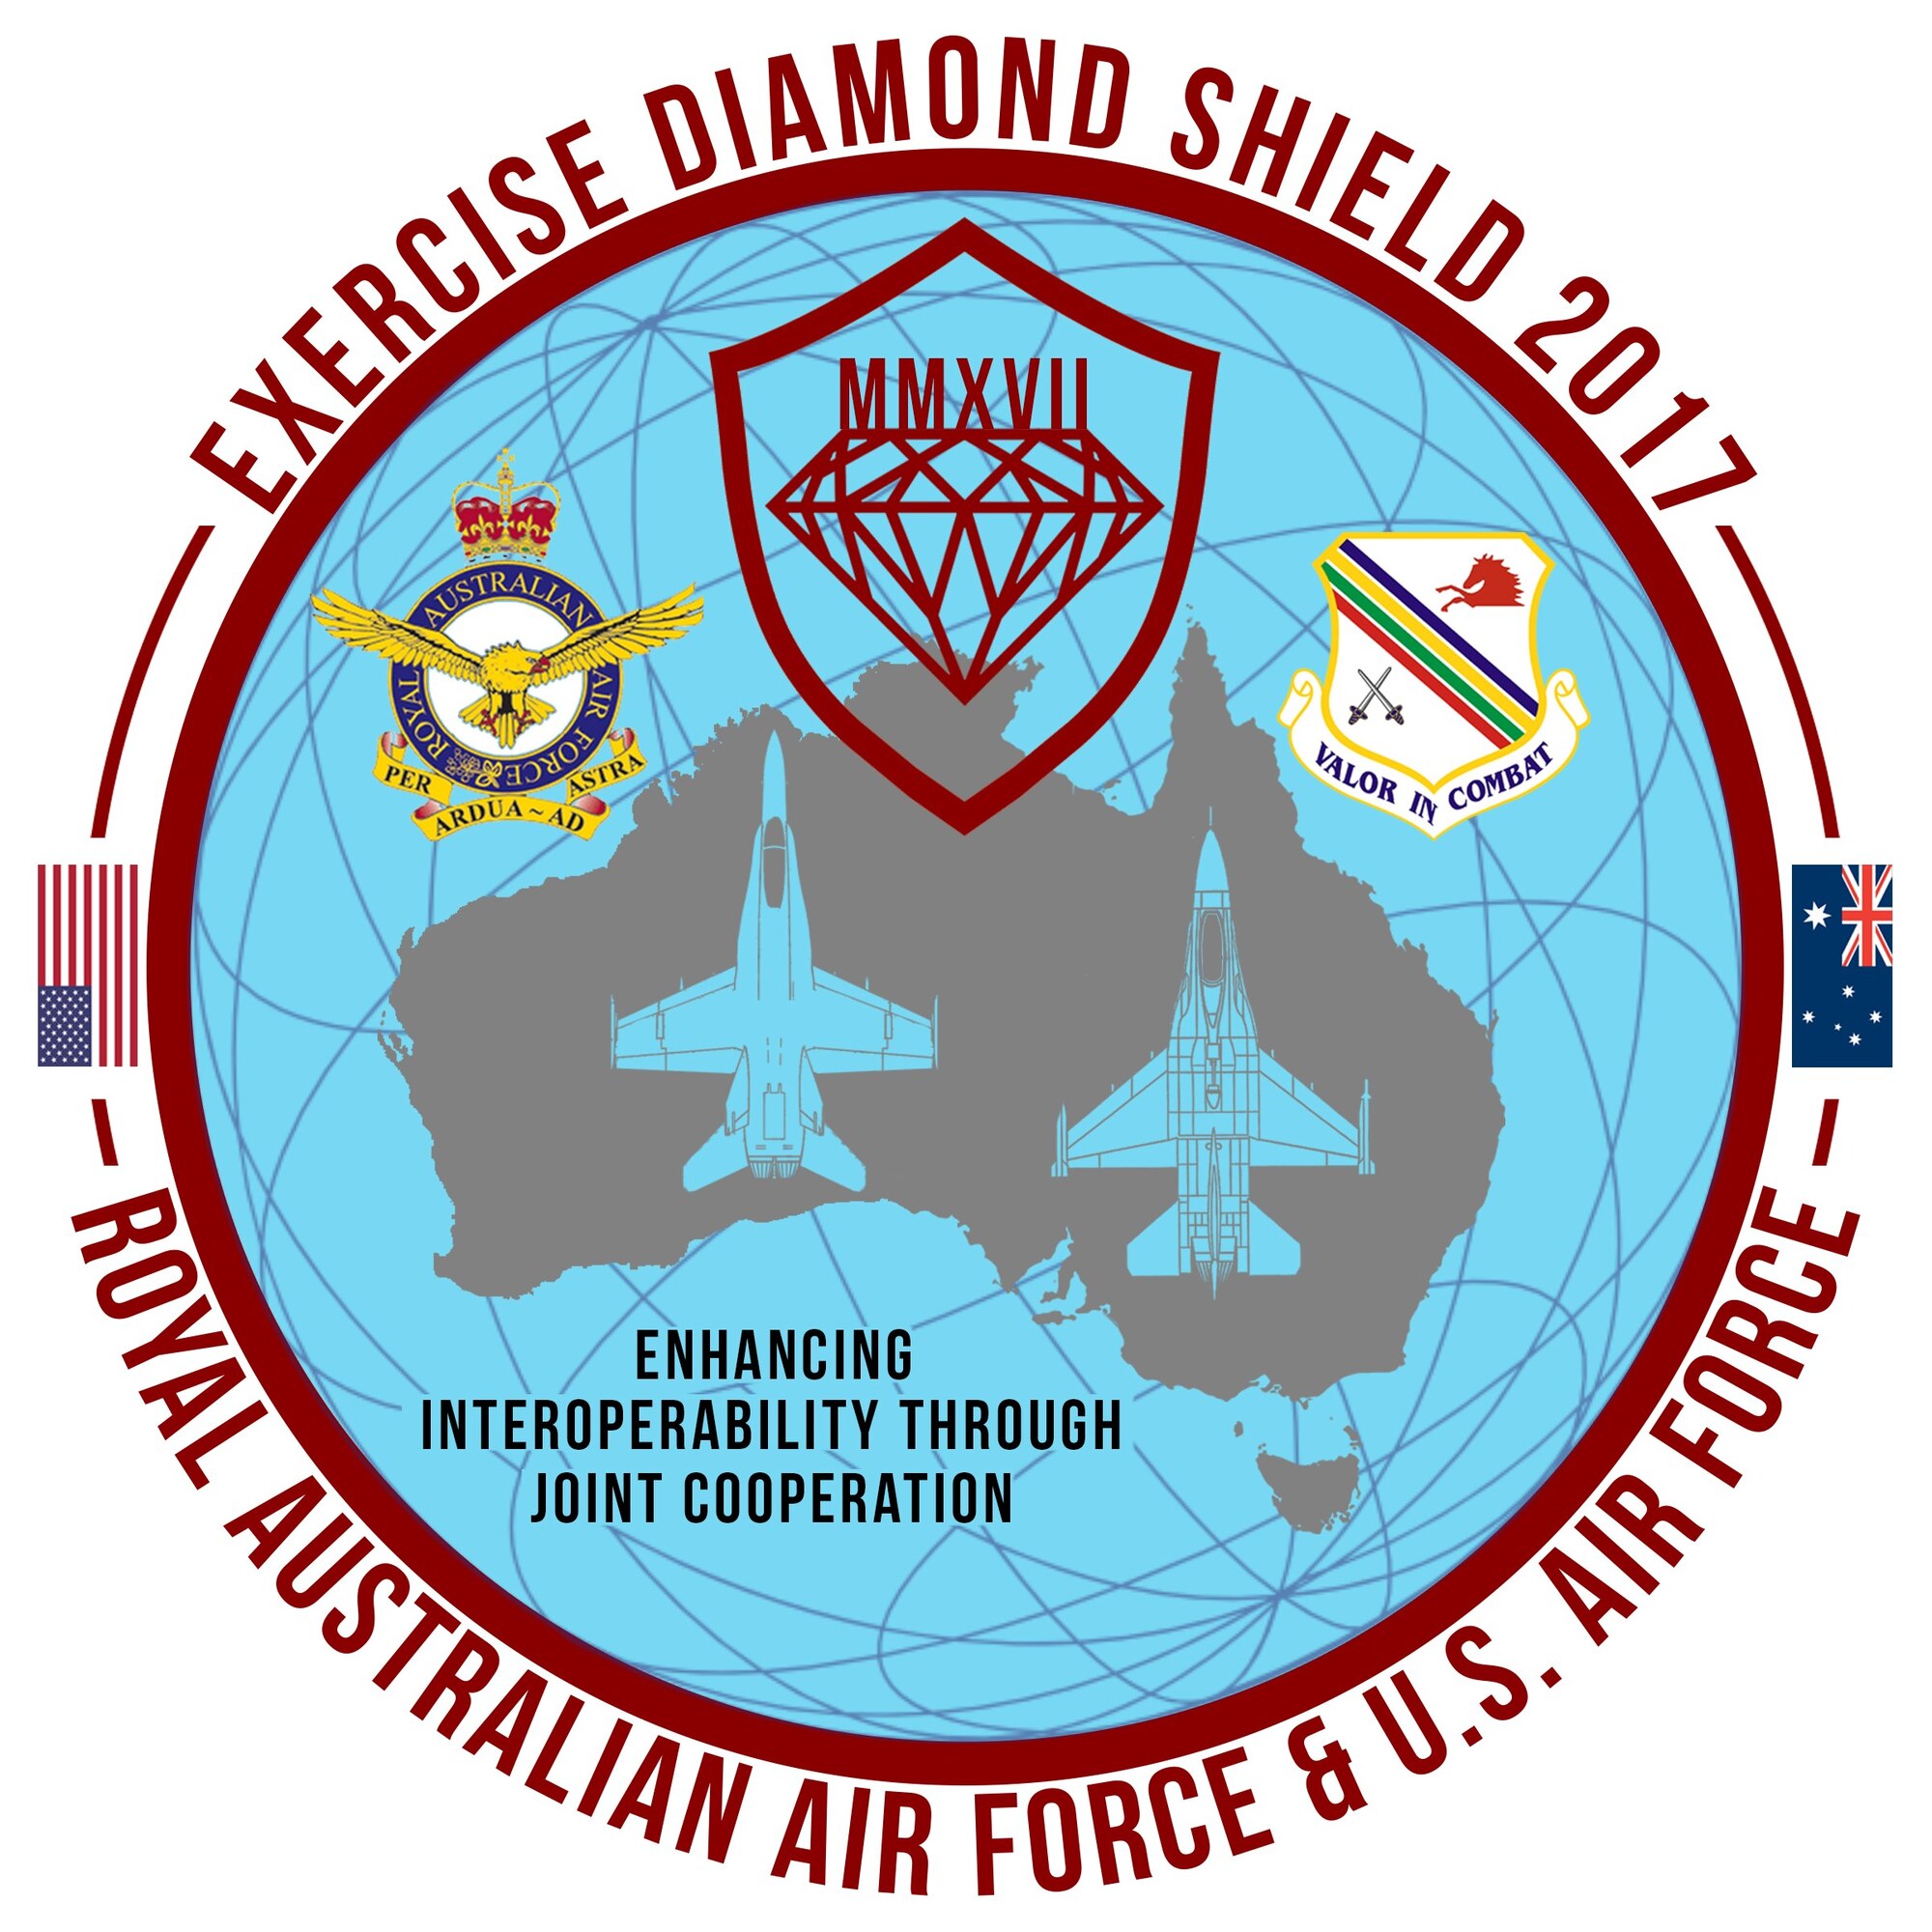 U.S. Air Force Airmen from Eielson Air Force Base, Alaska, have touched down at Royal Australian Air Force Base Williamtown, in New South Wales, Australia, for Exercise Diamond Shield 2017. Exercise DS17, the second of four Diamond Series exercises conducted by the RAAF Air Warfare Centre, is an Australian Defence Force training activity where high-readiness forces deploy quickly to remote locations in Australia in response to a simulated security threat. (U.S. Air Force graphic by Tech. Sgt. Steven R. Doty) 